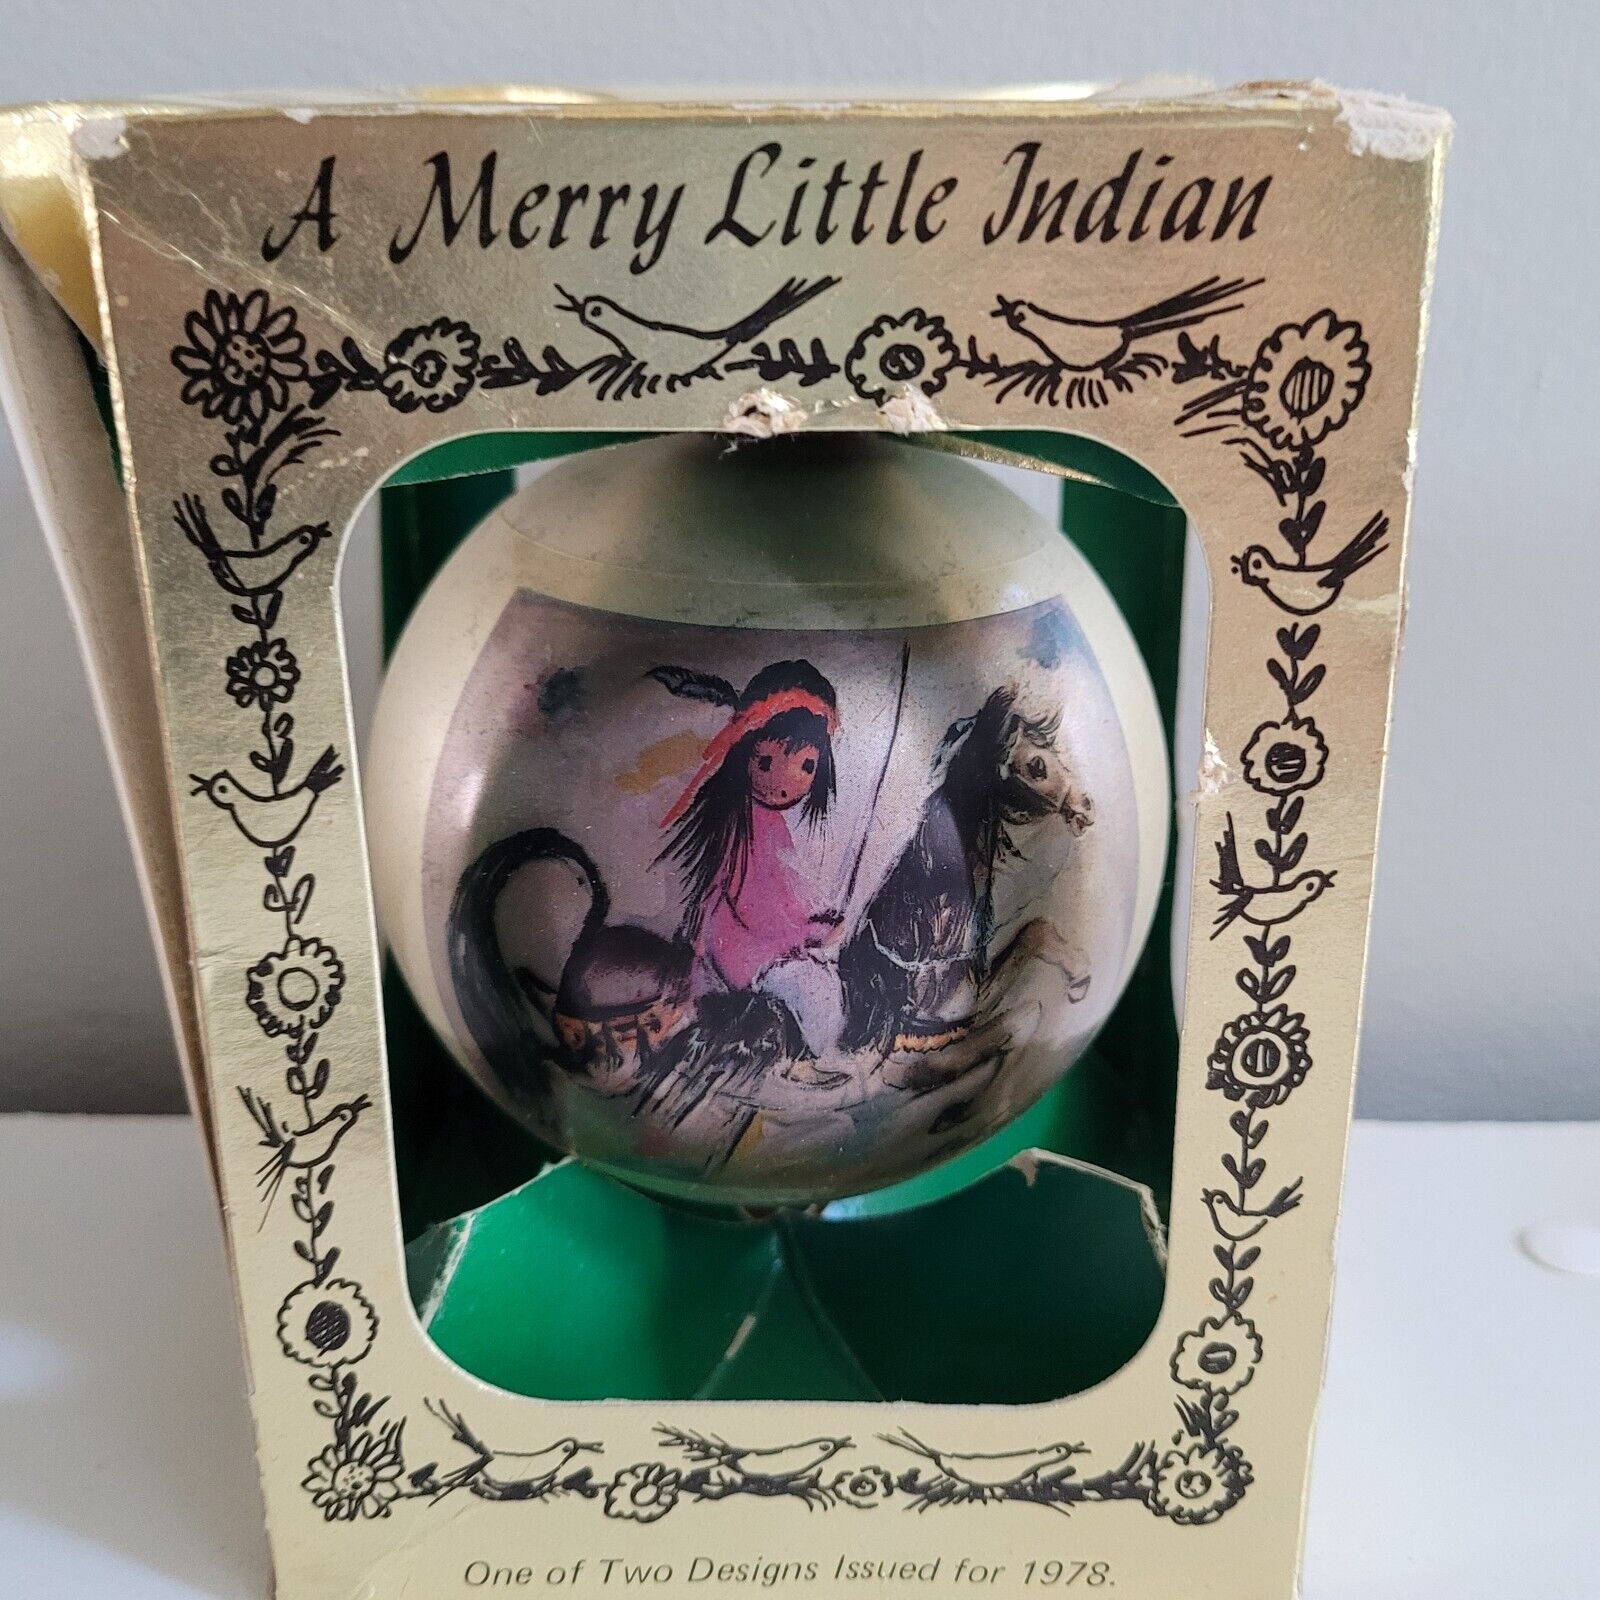 Vintage 1978 DeGrazia Gallery A MERRY LITTLE INDIAN ORNAMENT (CB2251)